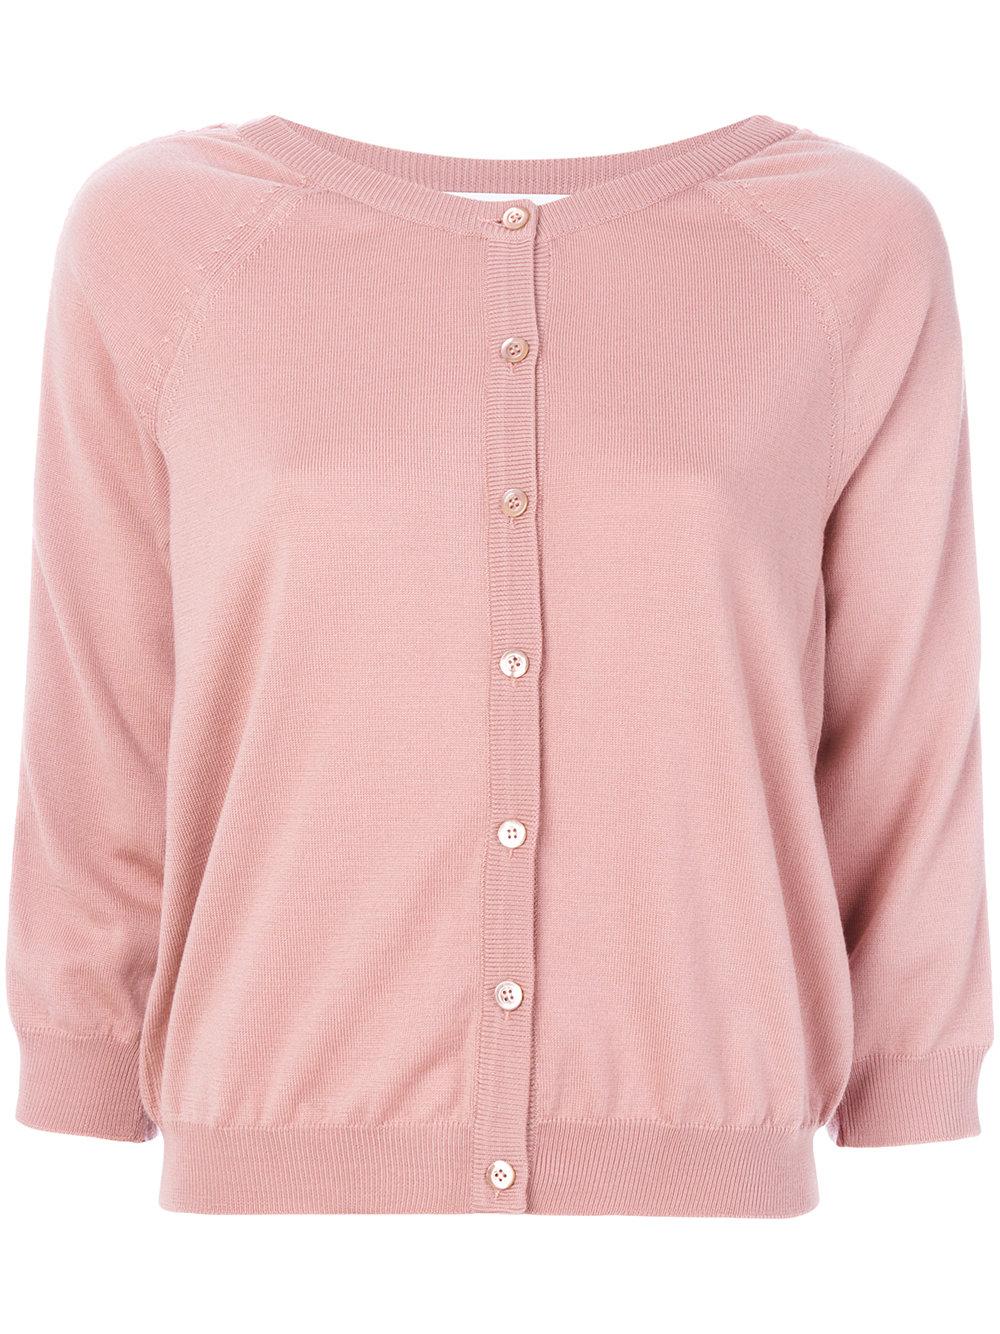 Moschino Button Up Cardigan in Pink - Save 40% | Lyst